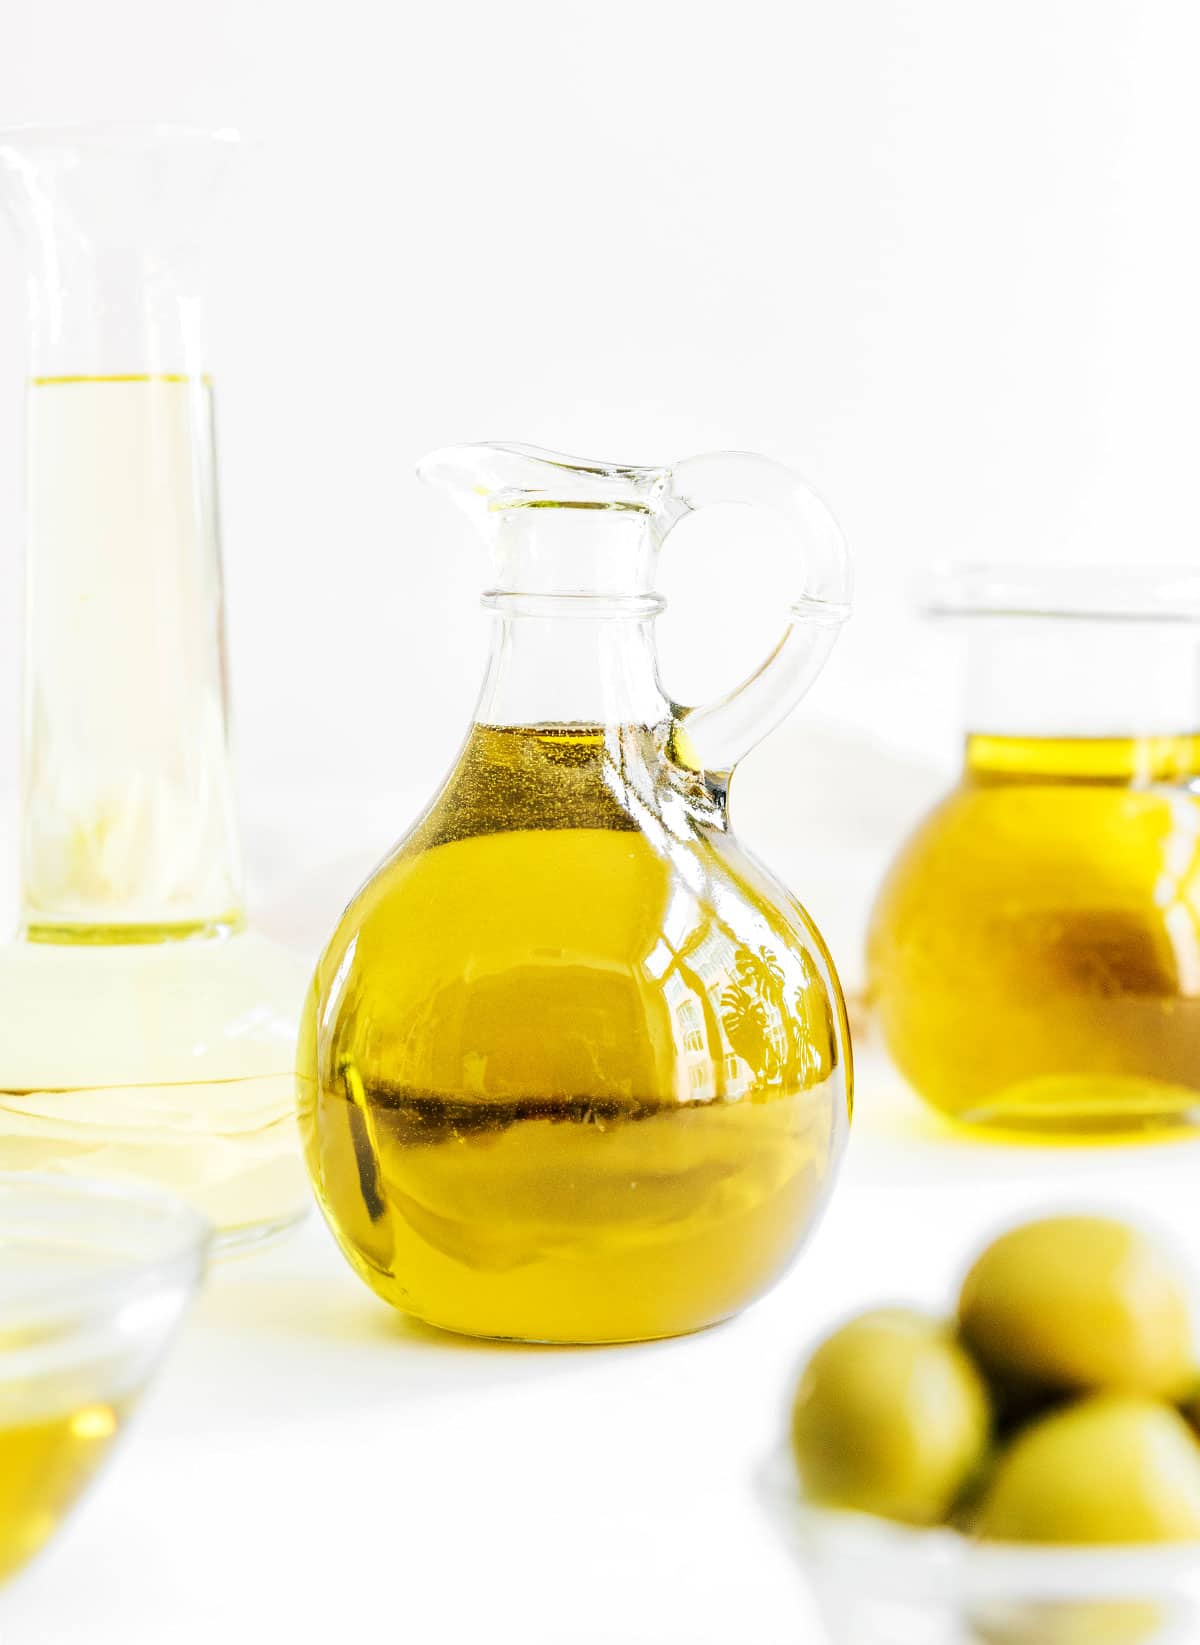 A glass handled jar filled with olive oil